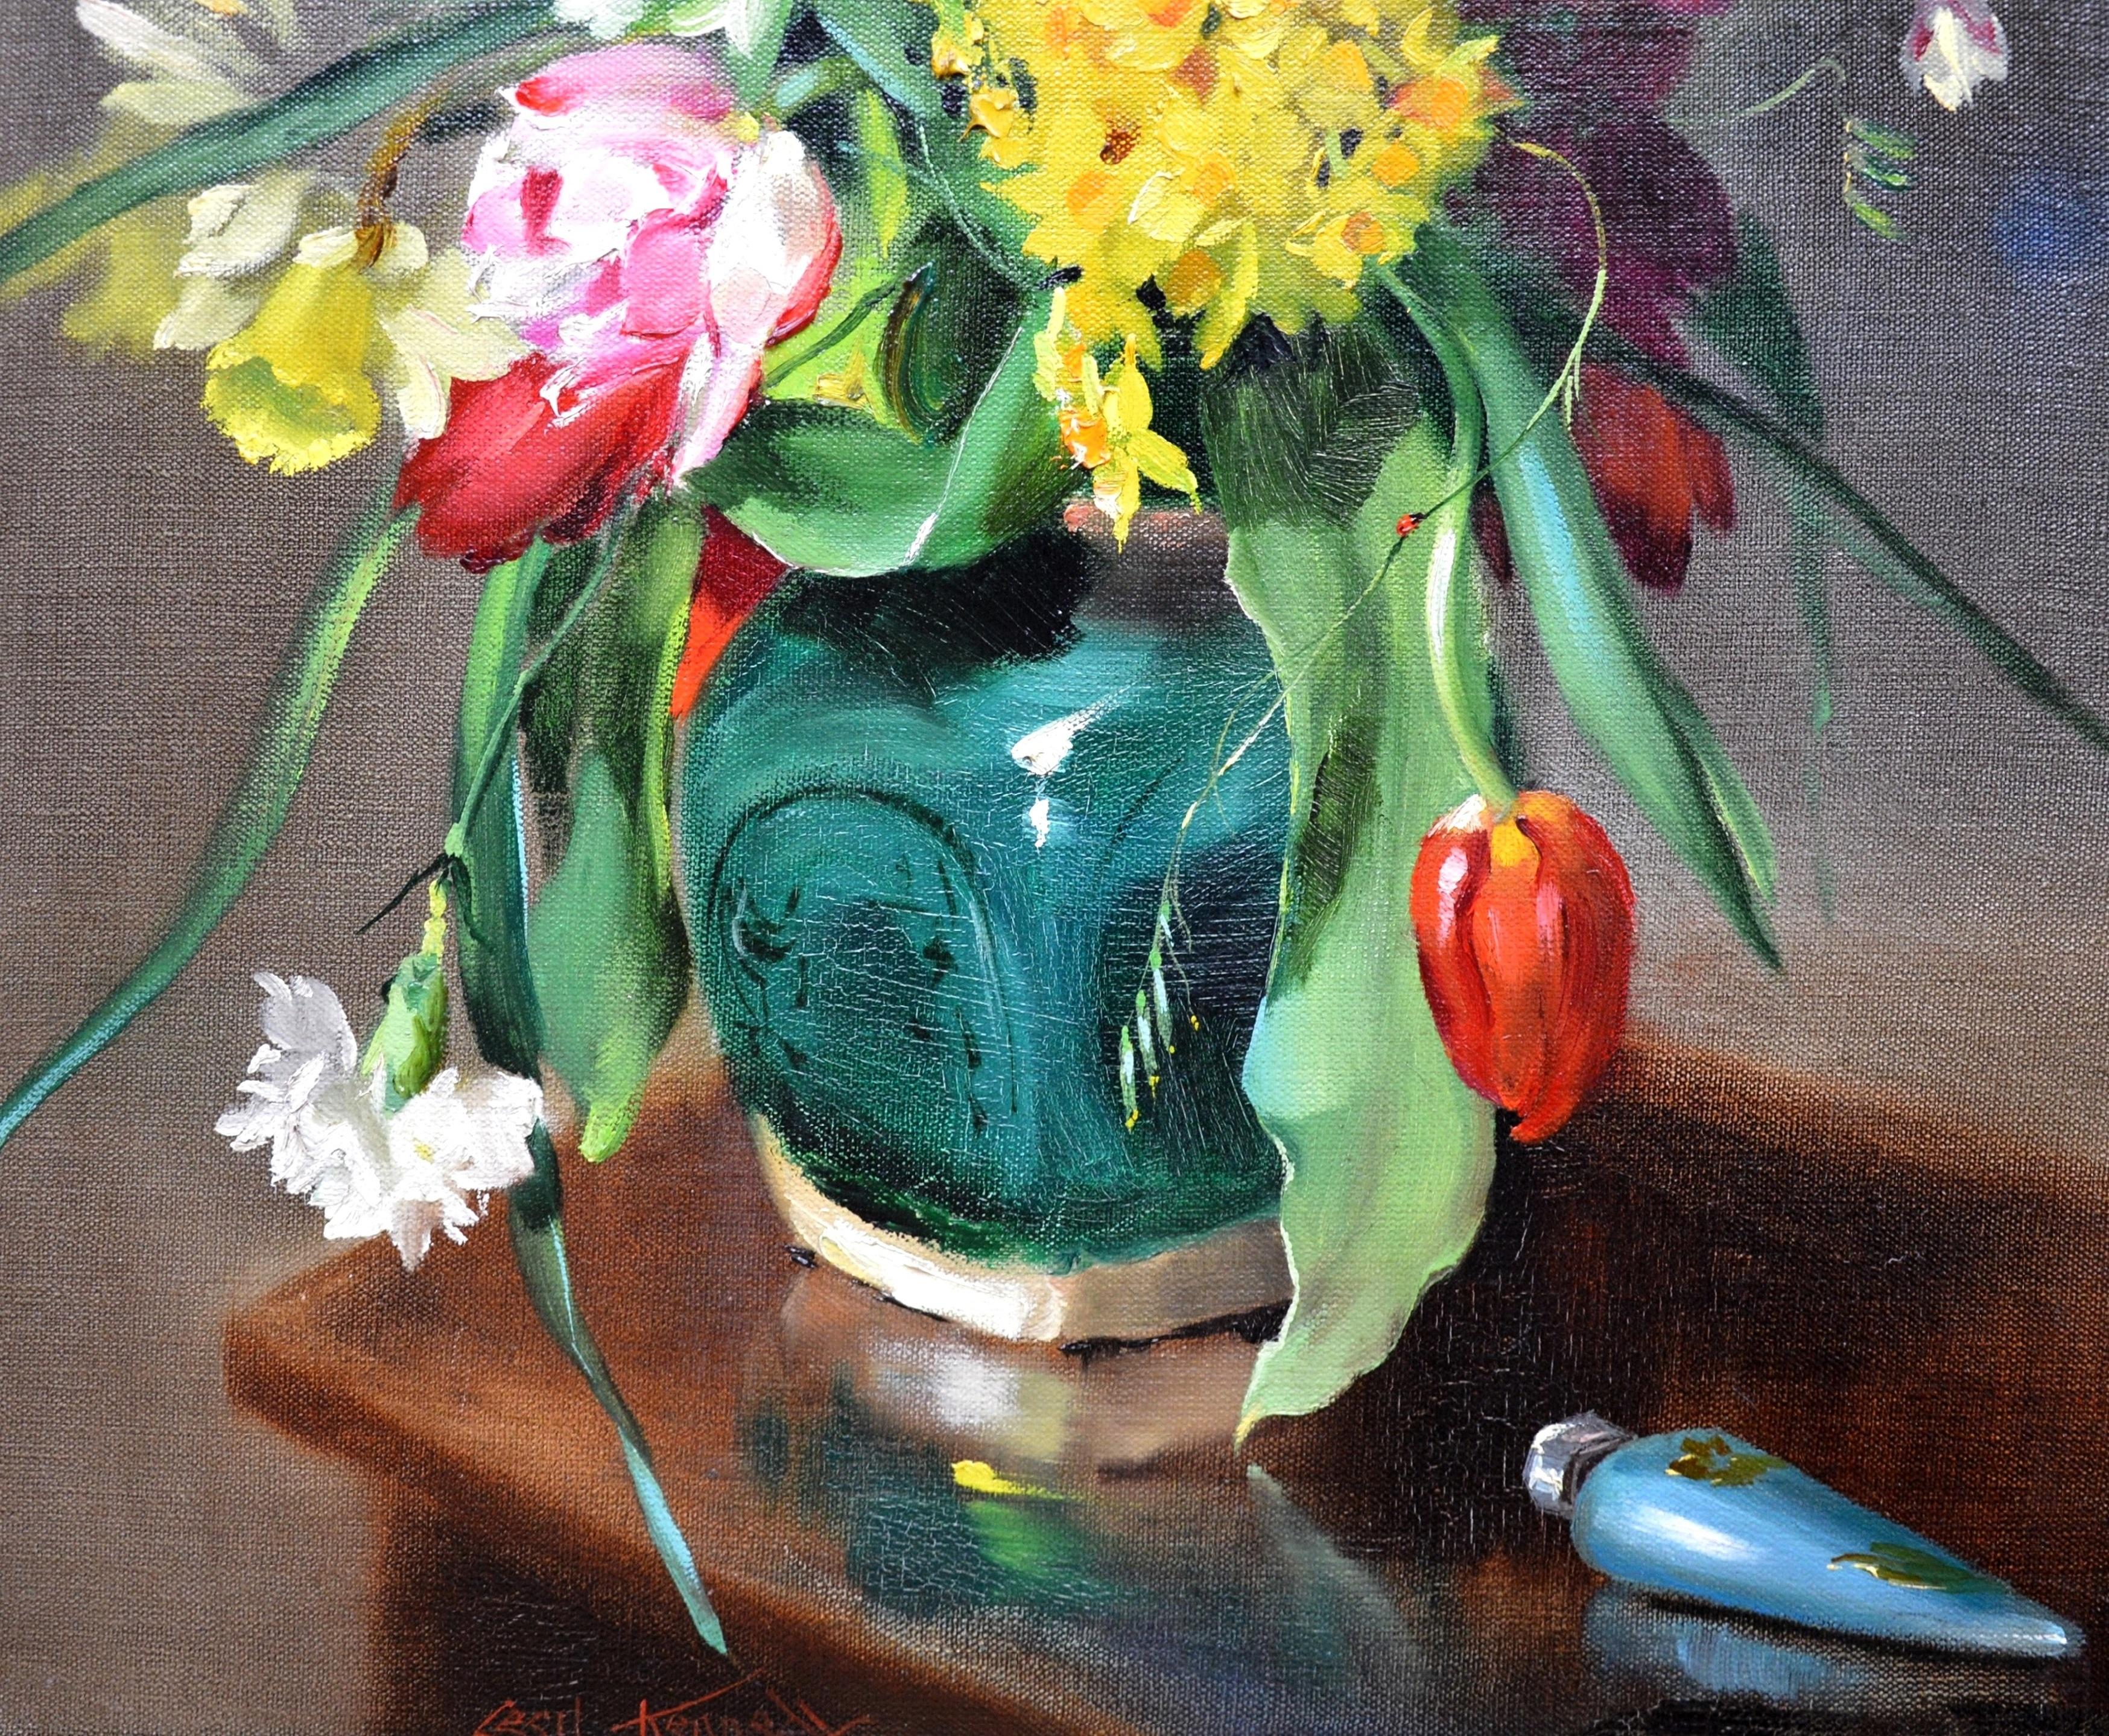 Tulips & Daffodils - Floral Still Life Oil Painting of Spring Flowers - Brown Still-Life Painting by Cecil Kennedy